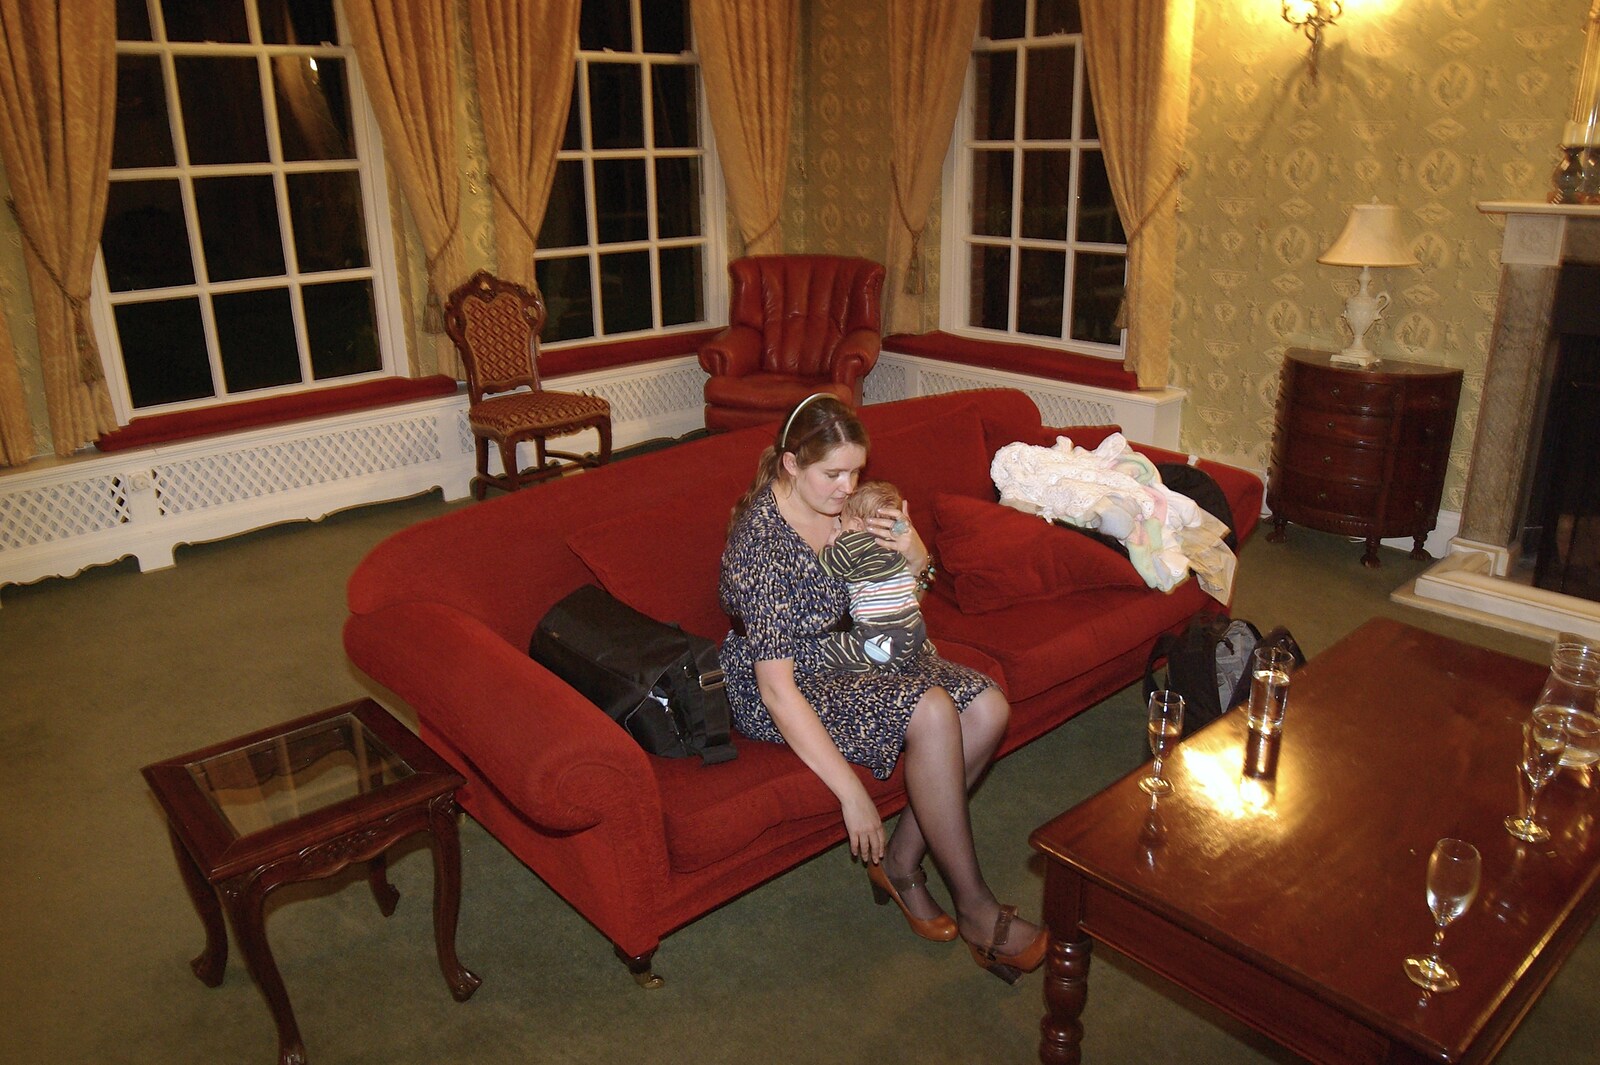 Matt and Emma's Wedding, Quendon, Essex - 7th November 2008: Isobel and Fred relax in the quiet room